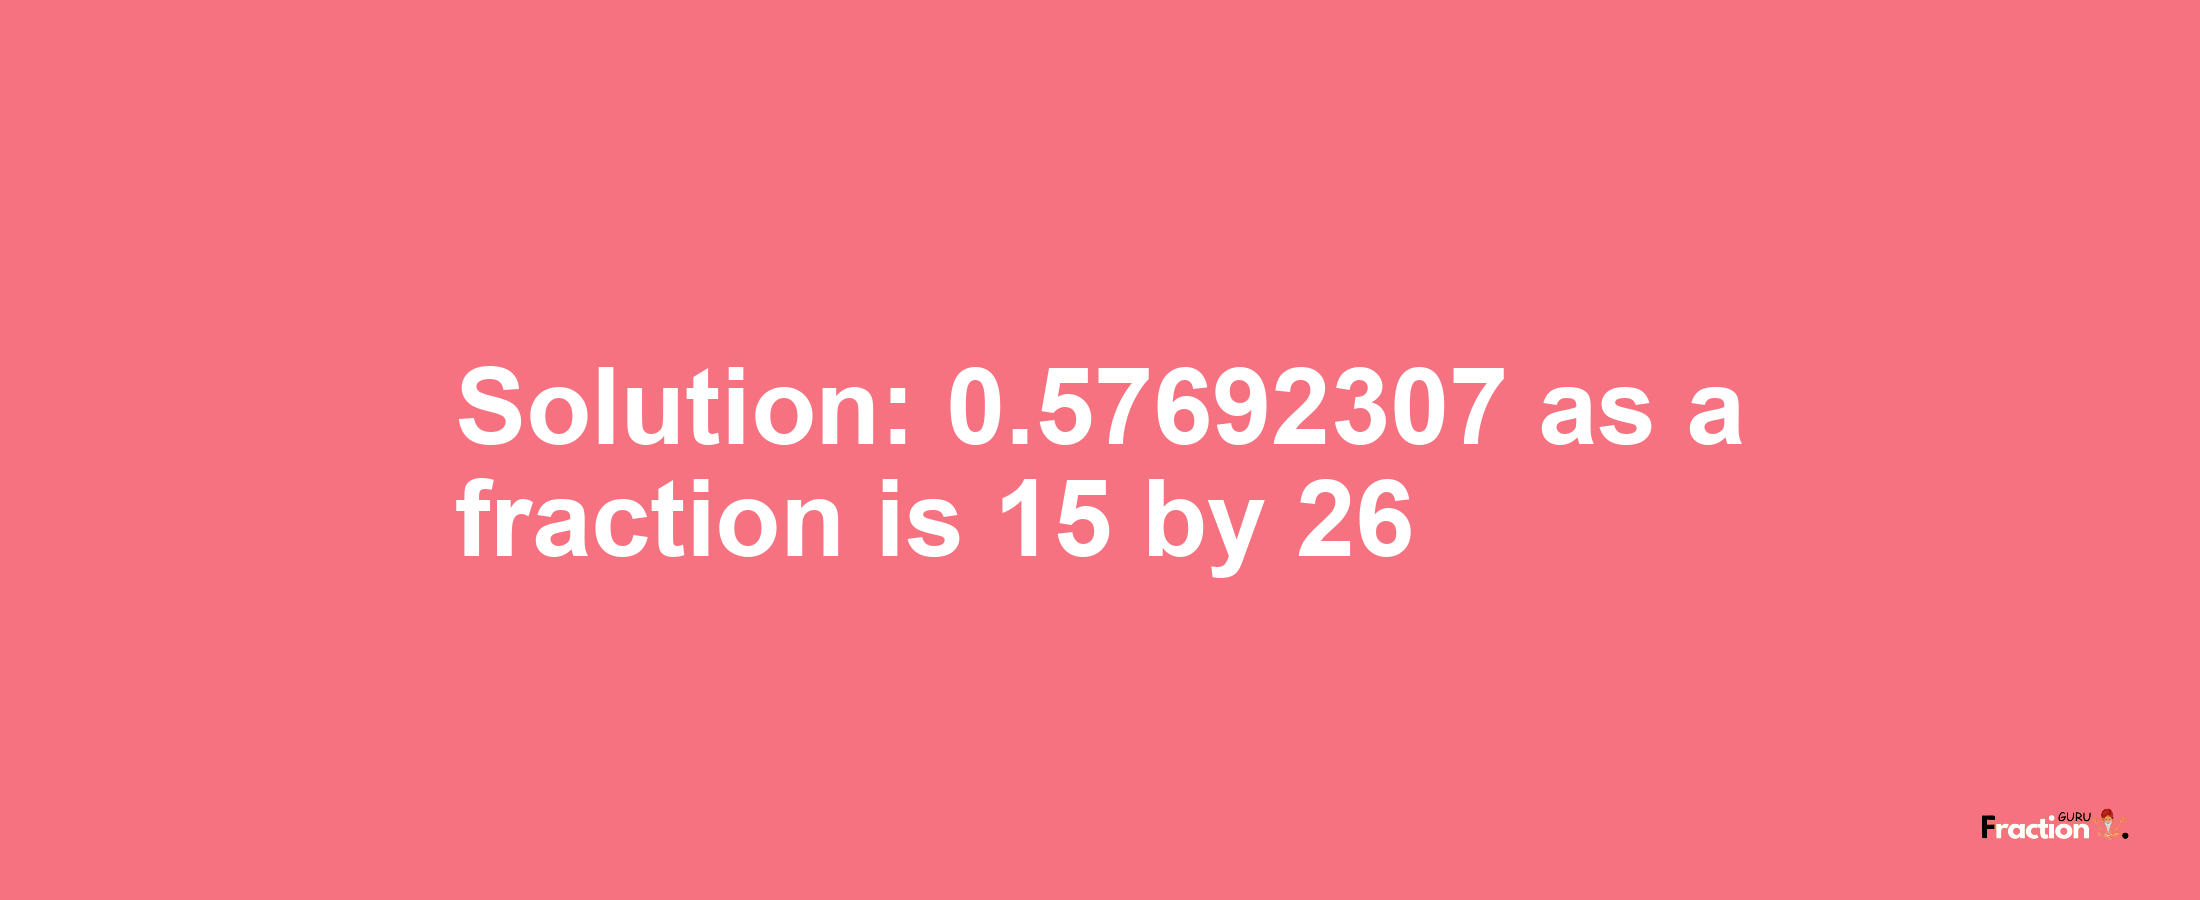 Solution:0.57692307 as a fraction is 15/26